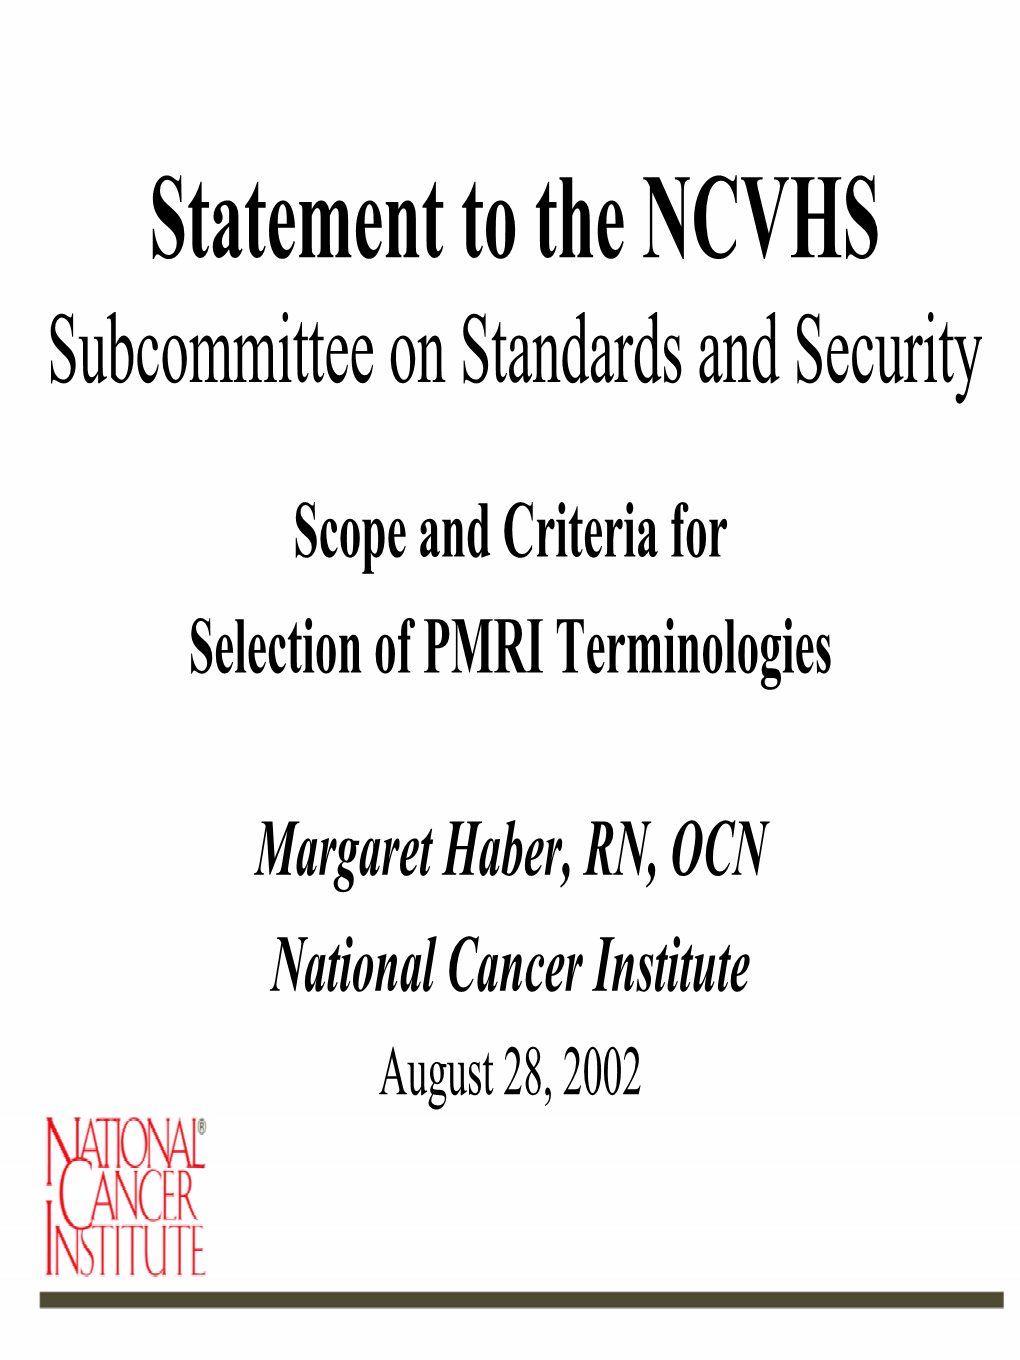 Statement to the NCVHS Subcommittee on Standards and Security